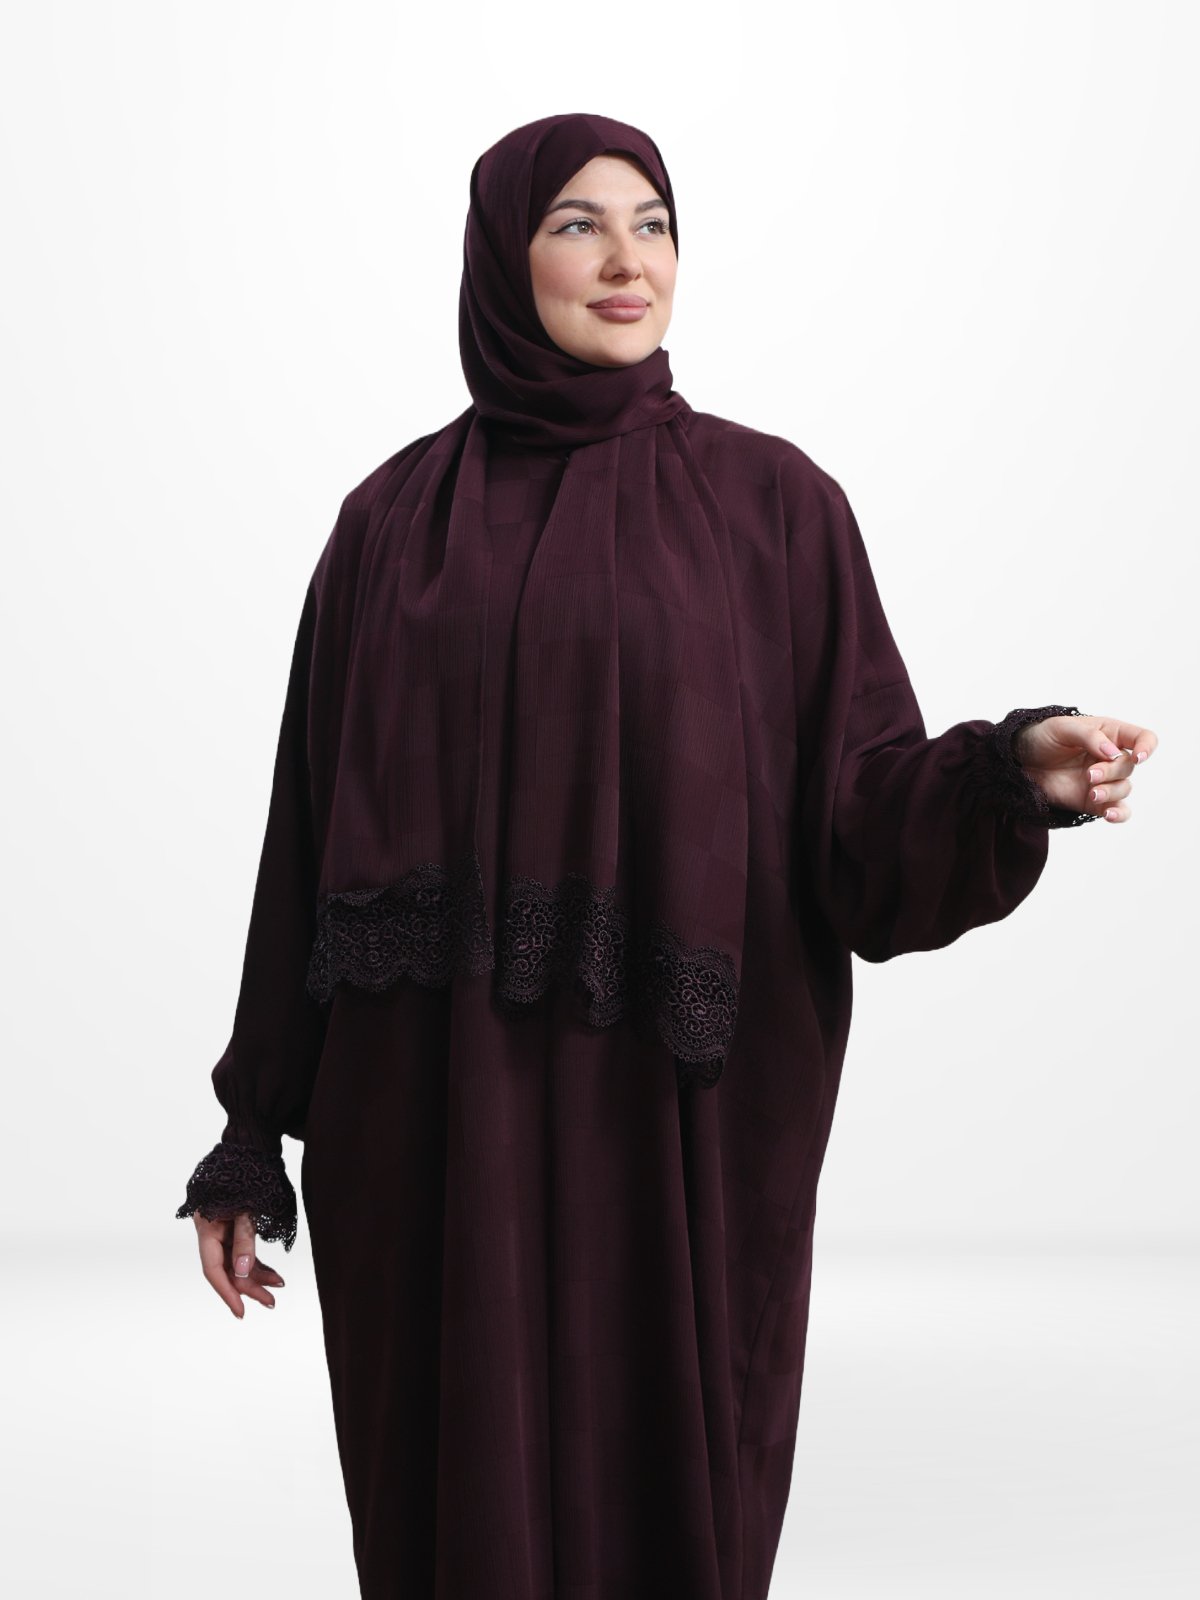 One - Piece Prayer Dress & Abaya with attached Hijab - Squared Crepe - Modest Essence